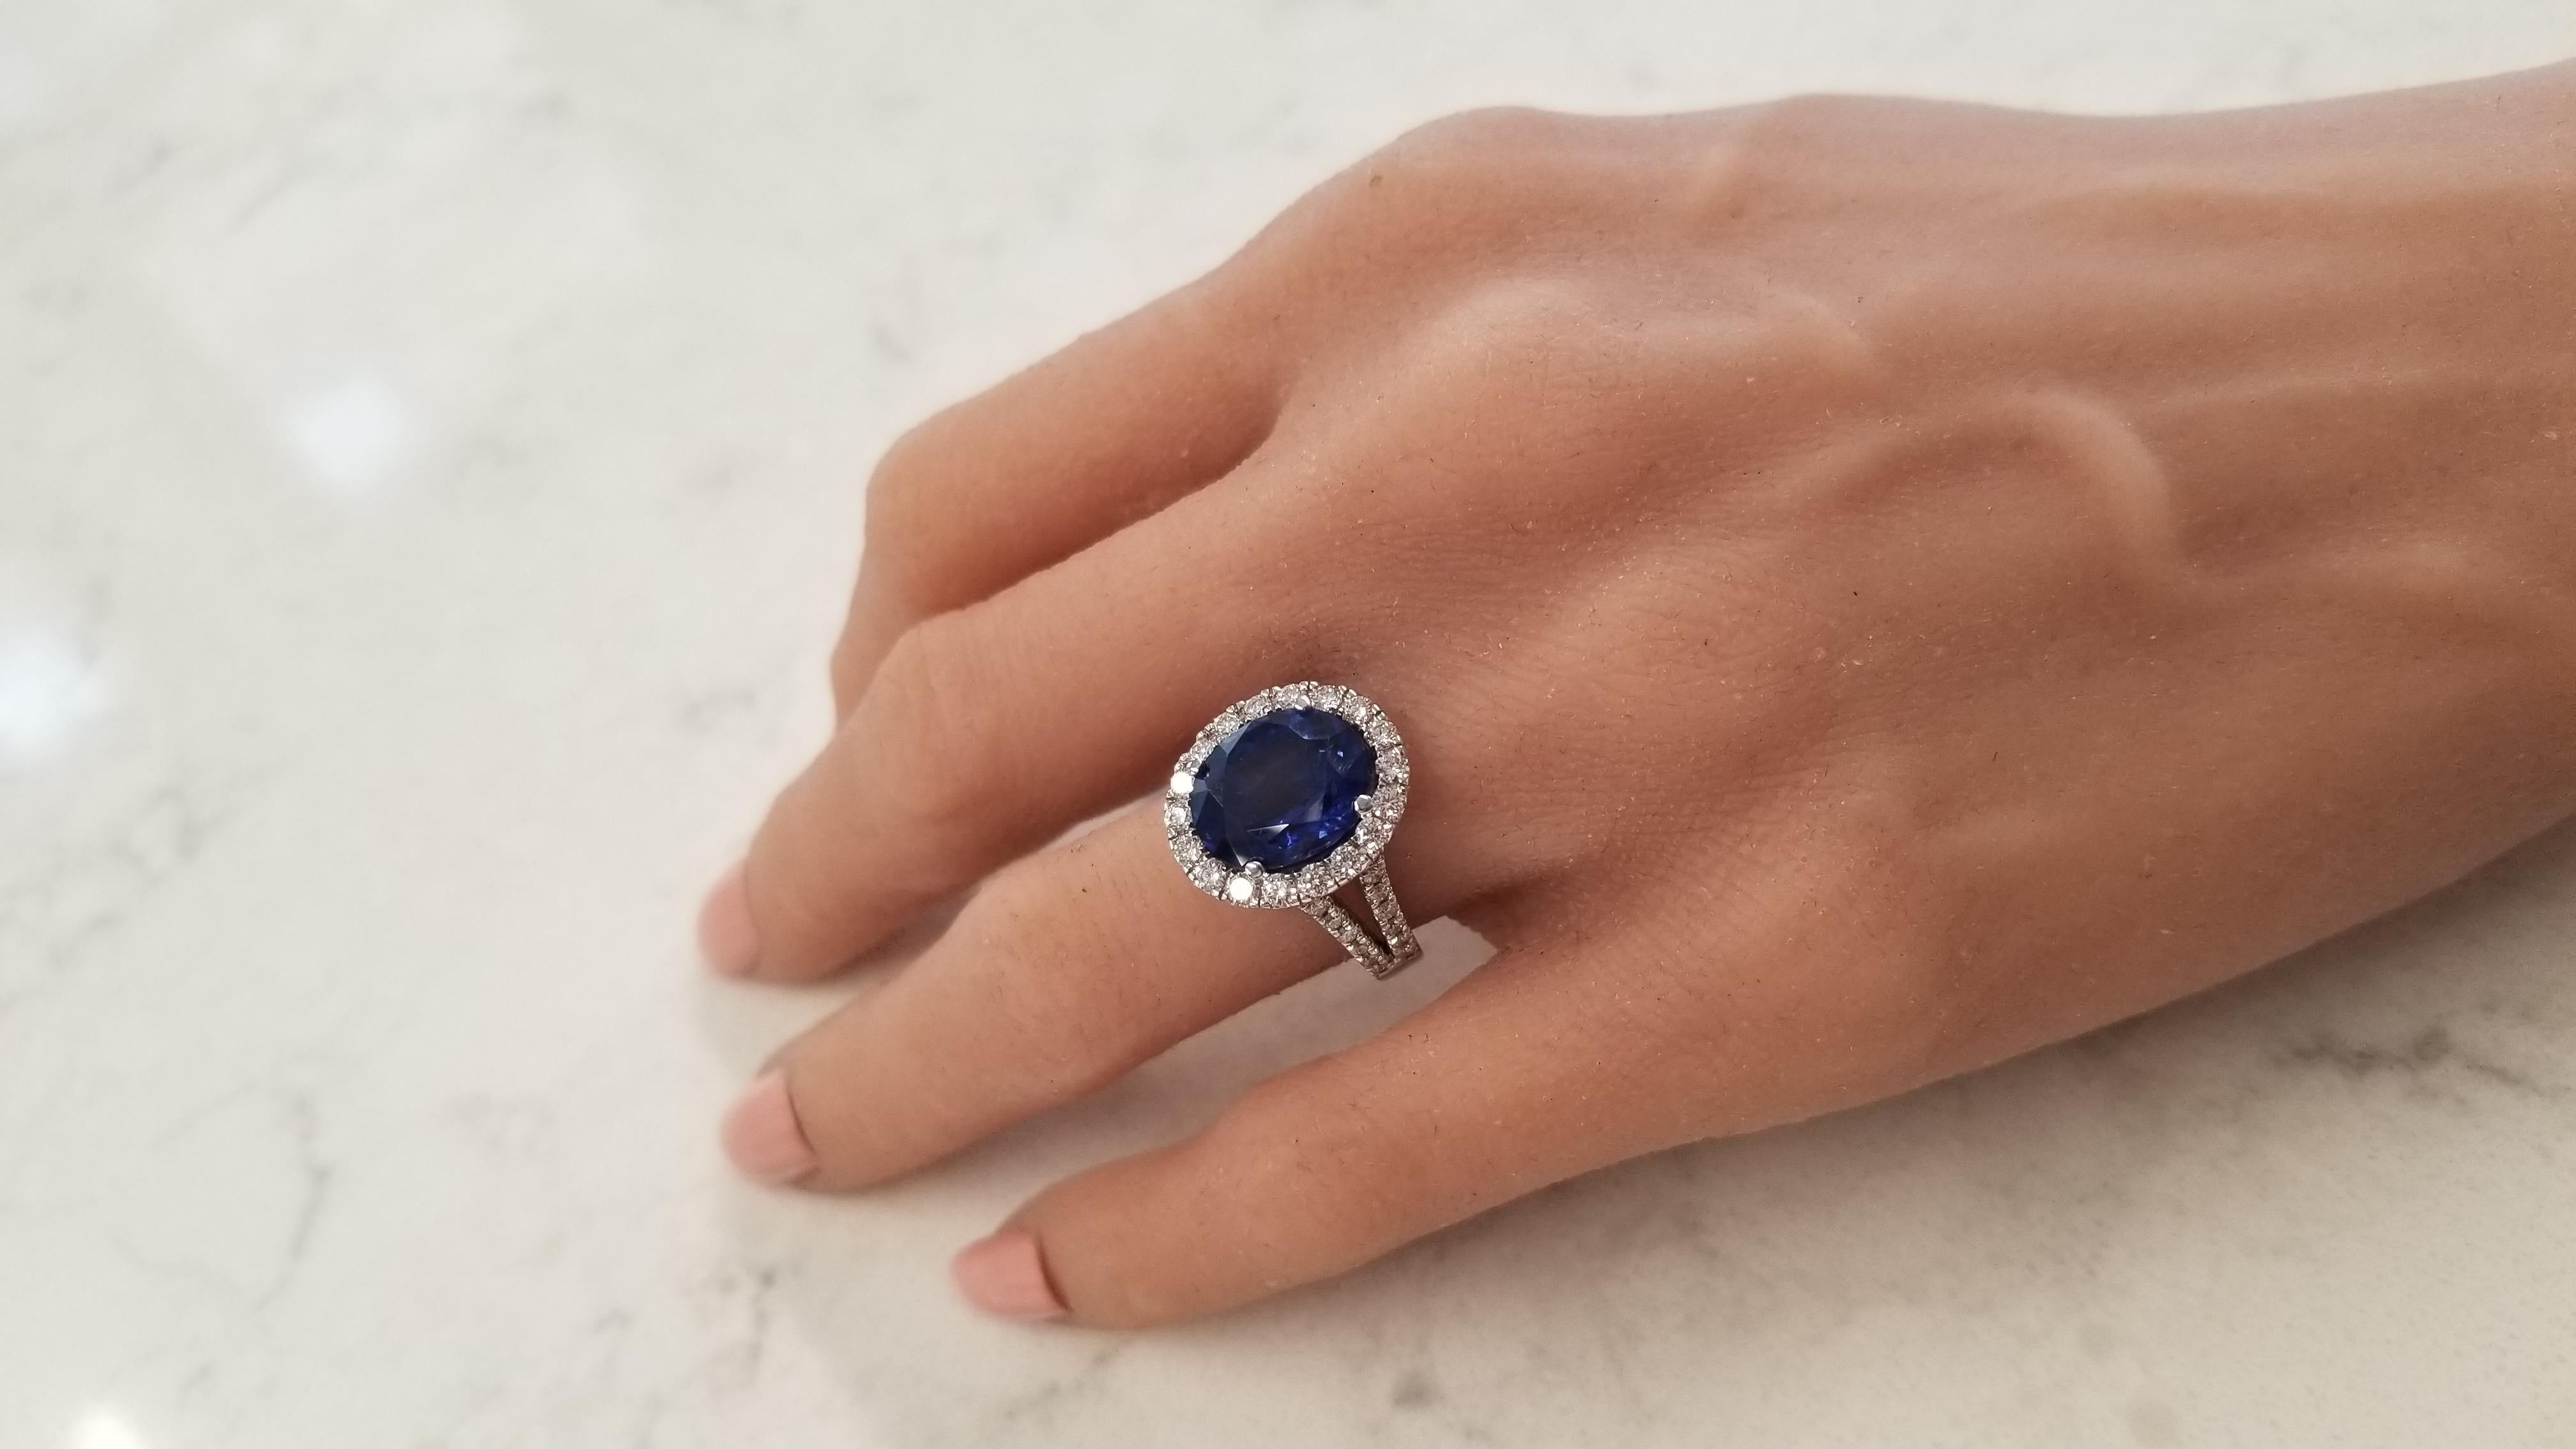 This is a GRS certified intense royal blue sapphire that weighs 6.18 carats and measures 11.88 x 9.83 x 6.51mm in a centered prong setting. The gem source is Sri Lanka; having its size with the excellent transparency and luster is a difficult